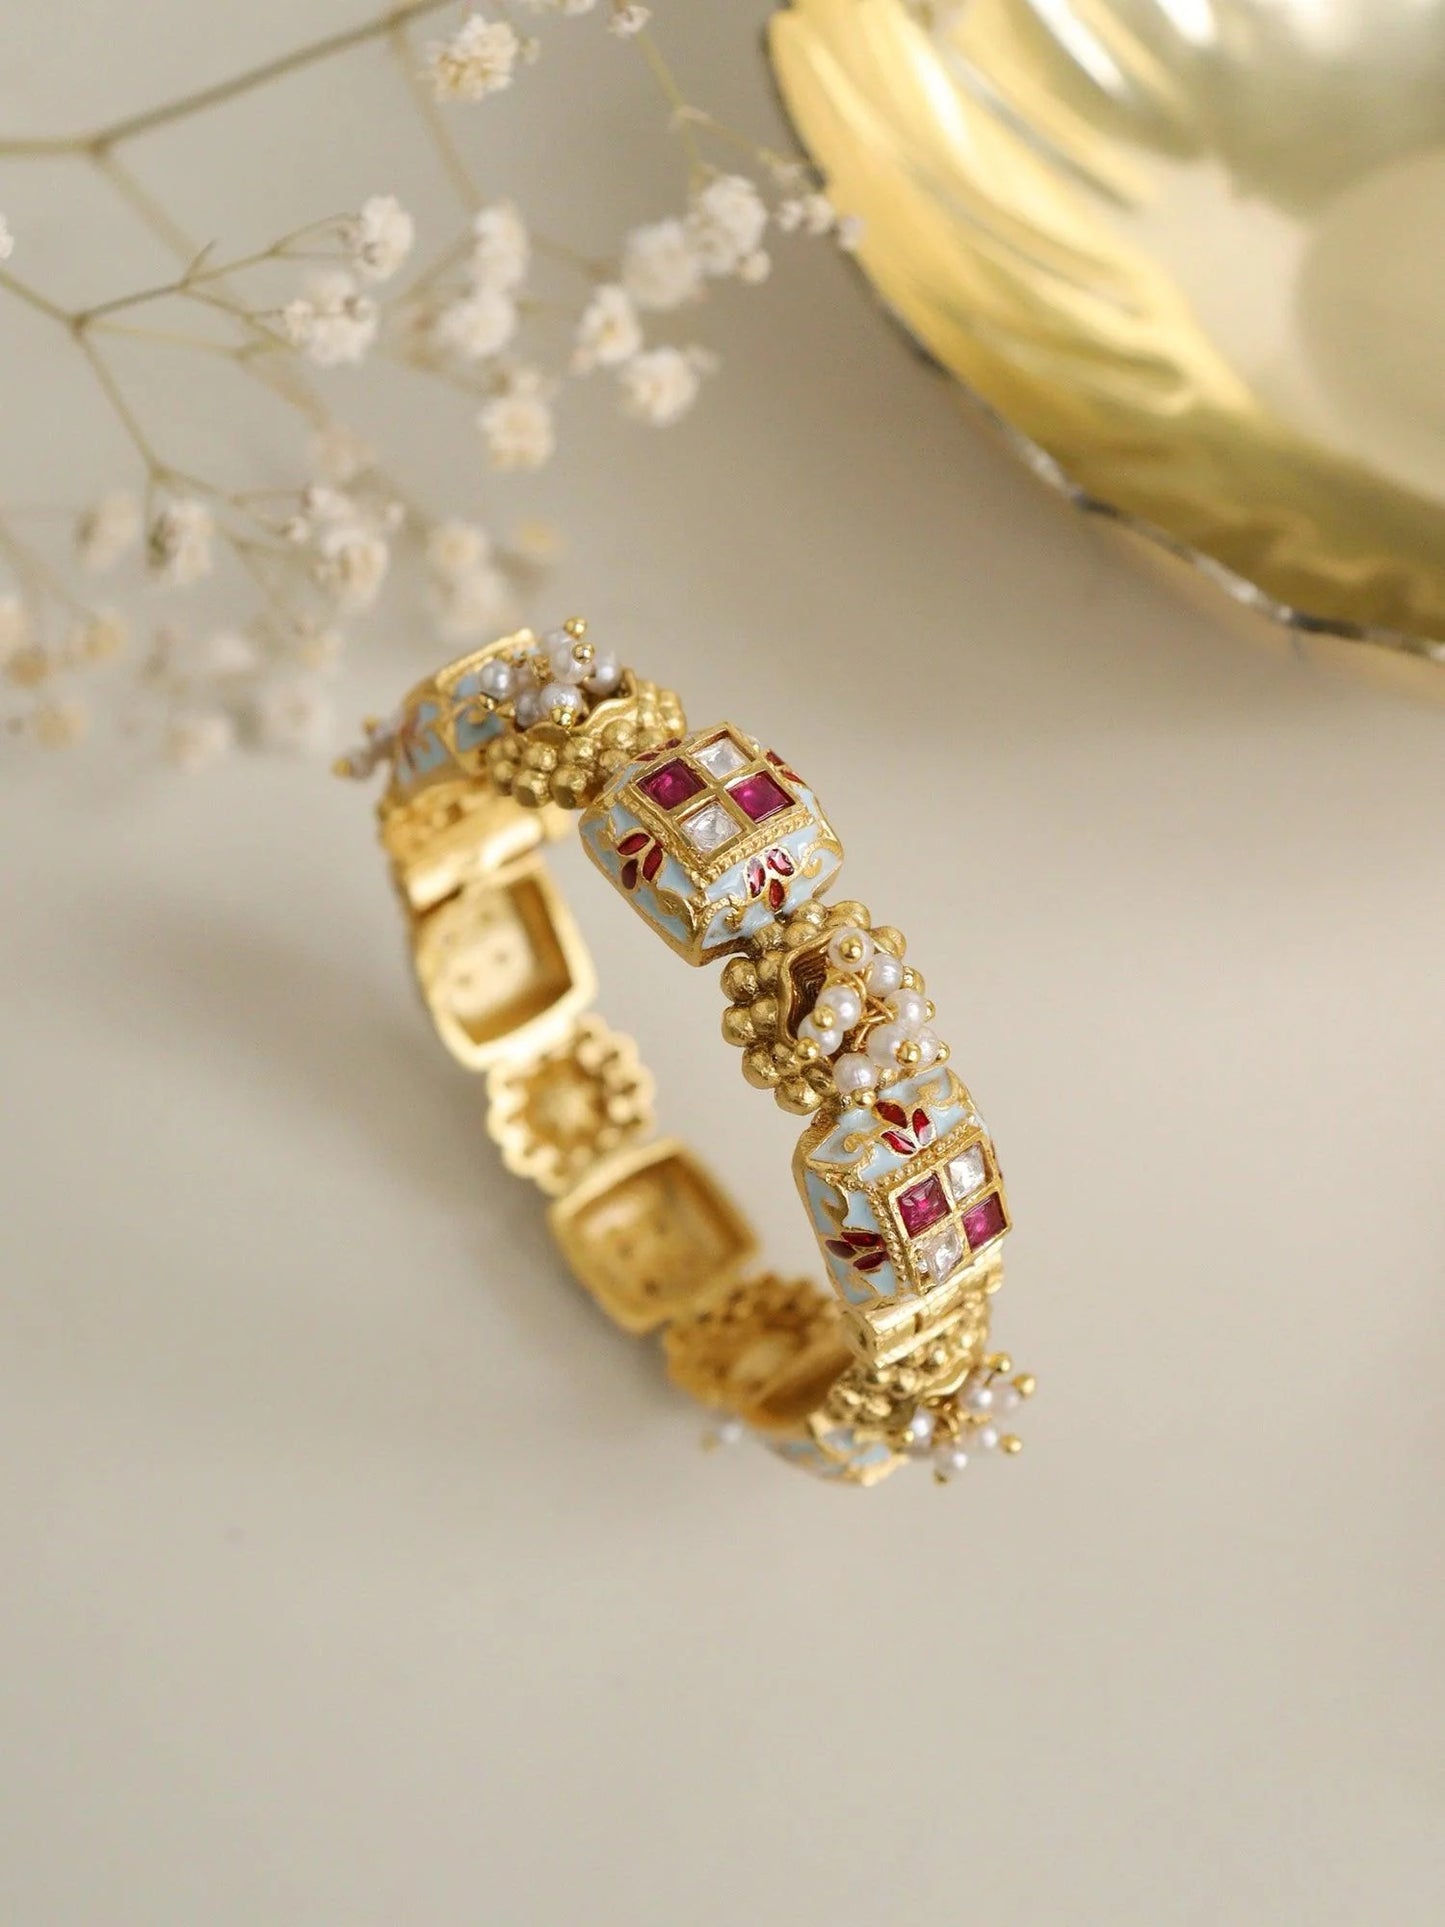 THE BUTTERFLY EFFECT JEWELRY - gold floral bangle